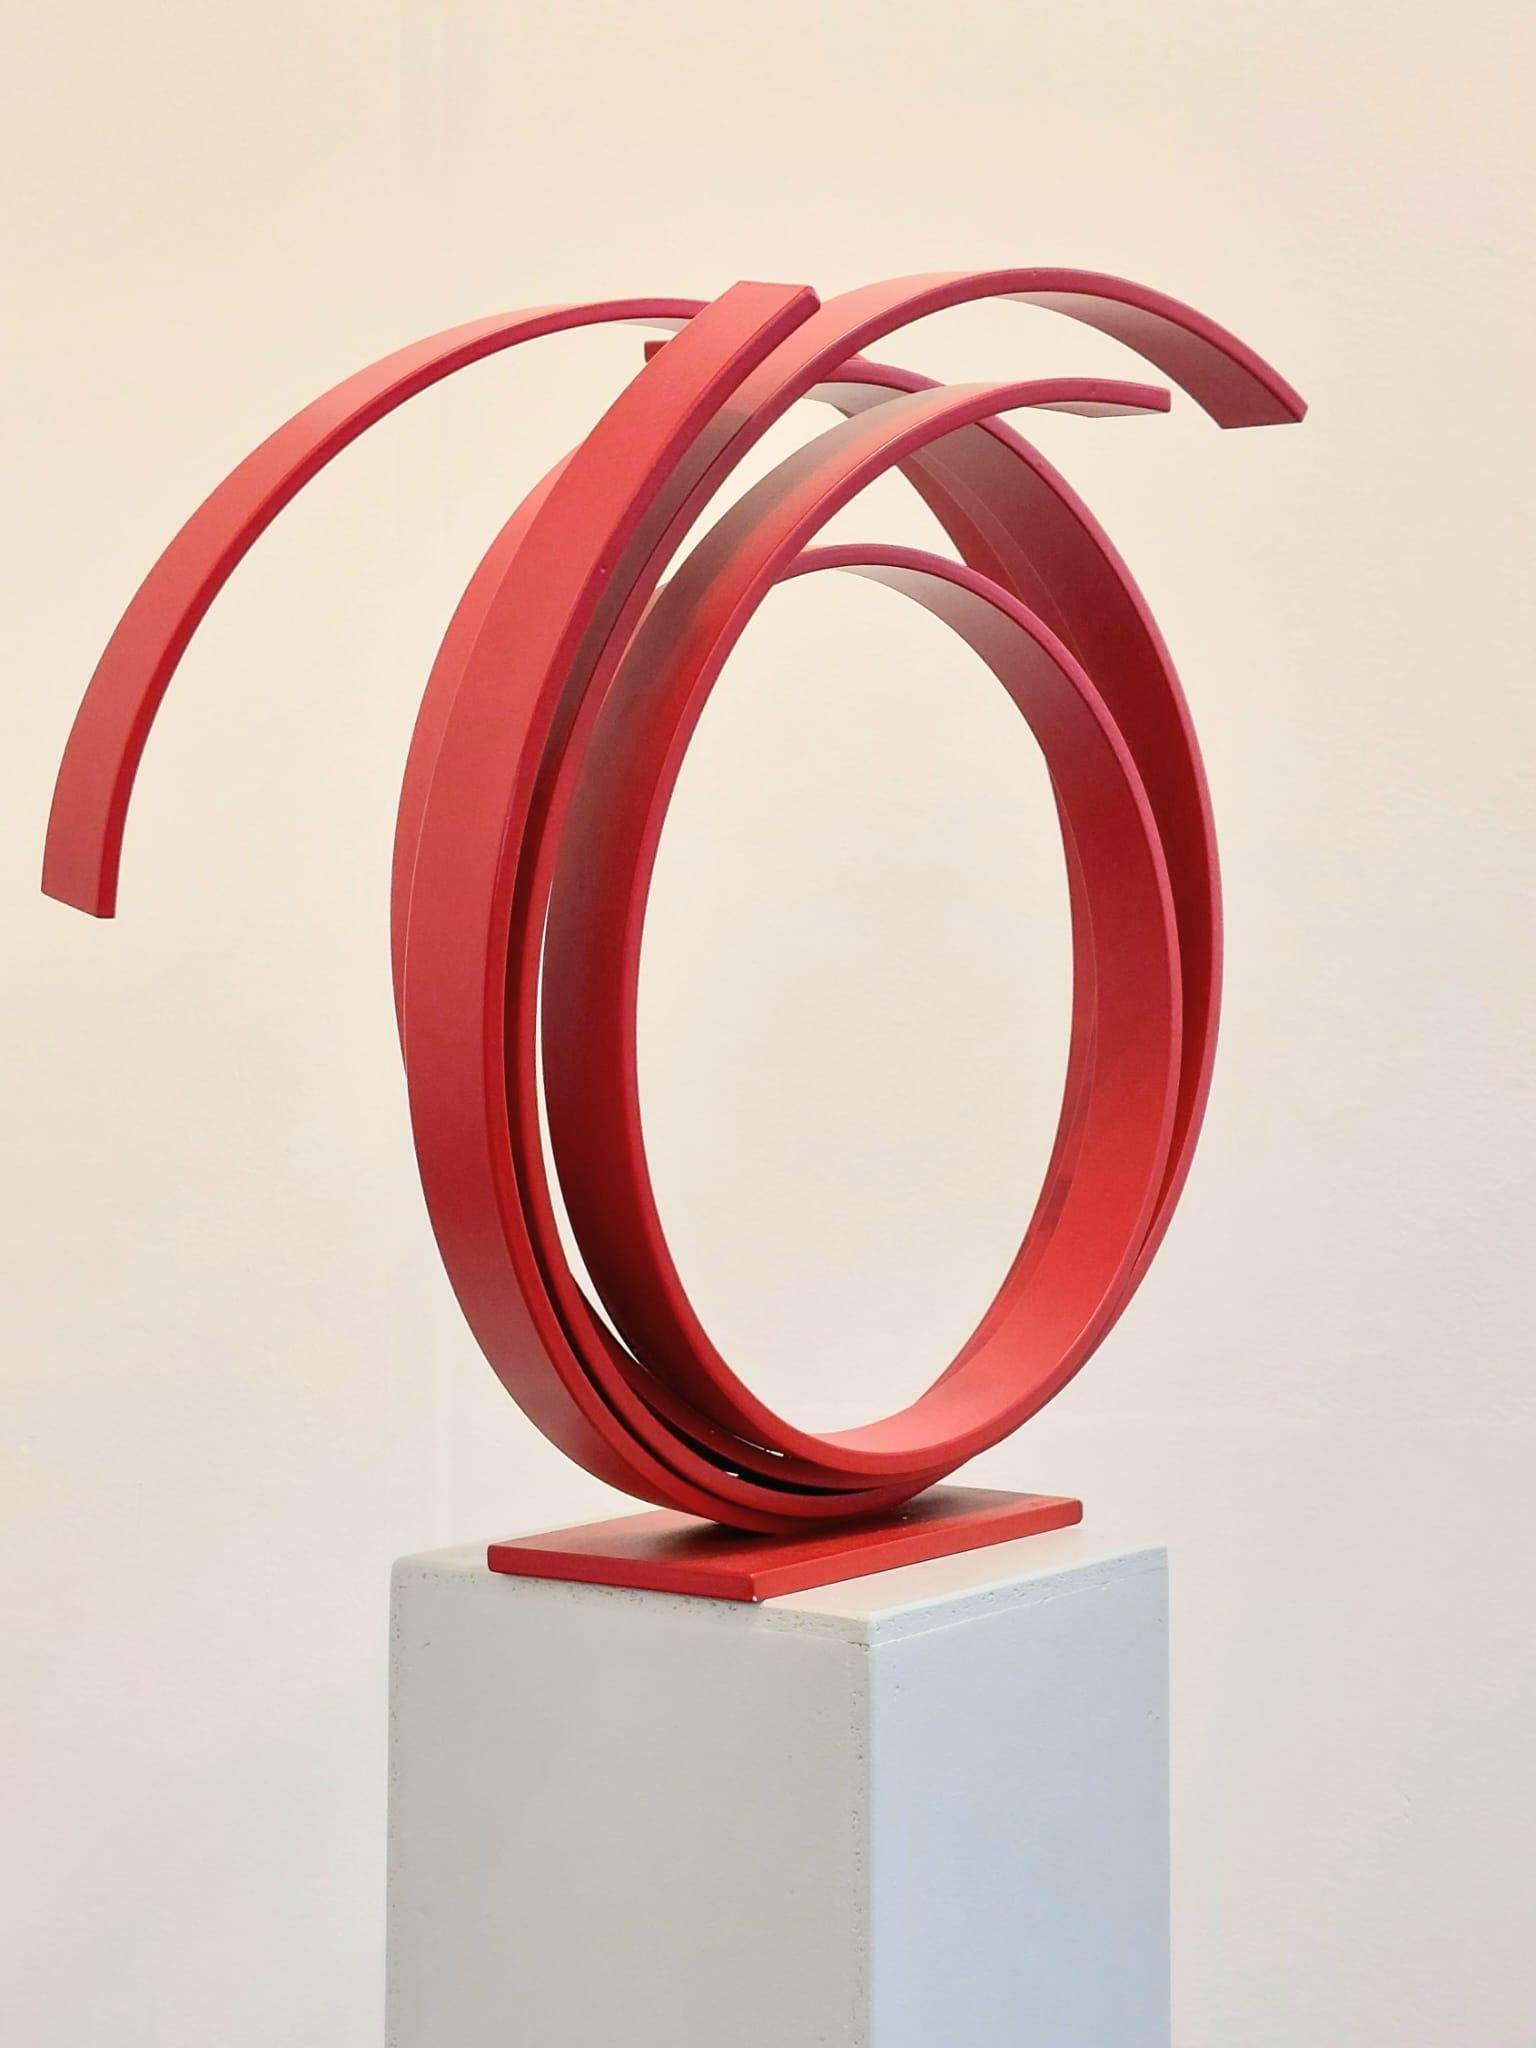 Red Orbit by Kuno Vollet - Large Contemporary Round Orbit sculpture  For Sale 2